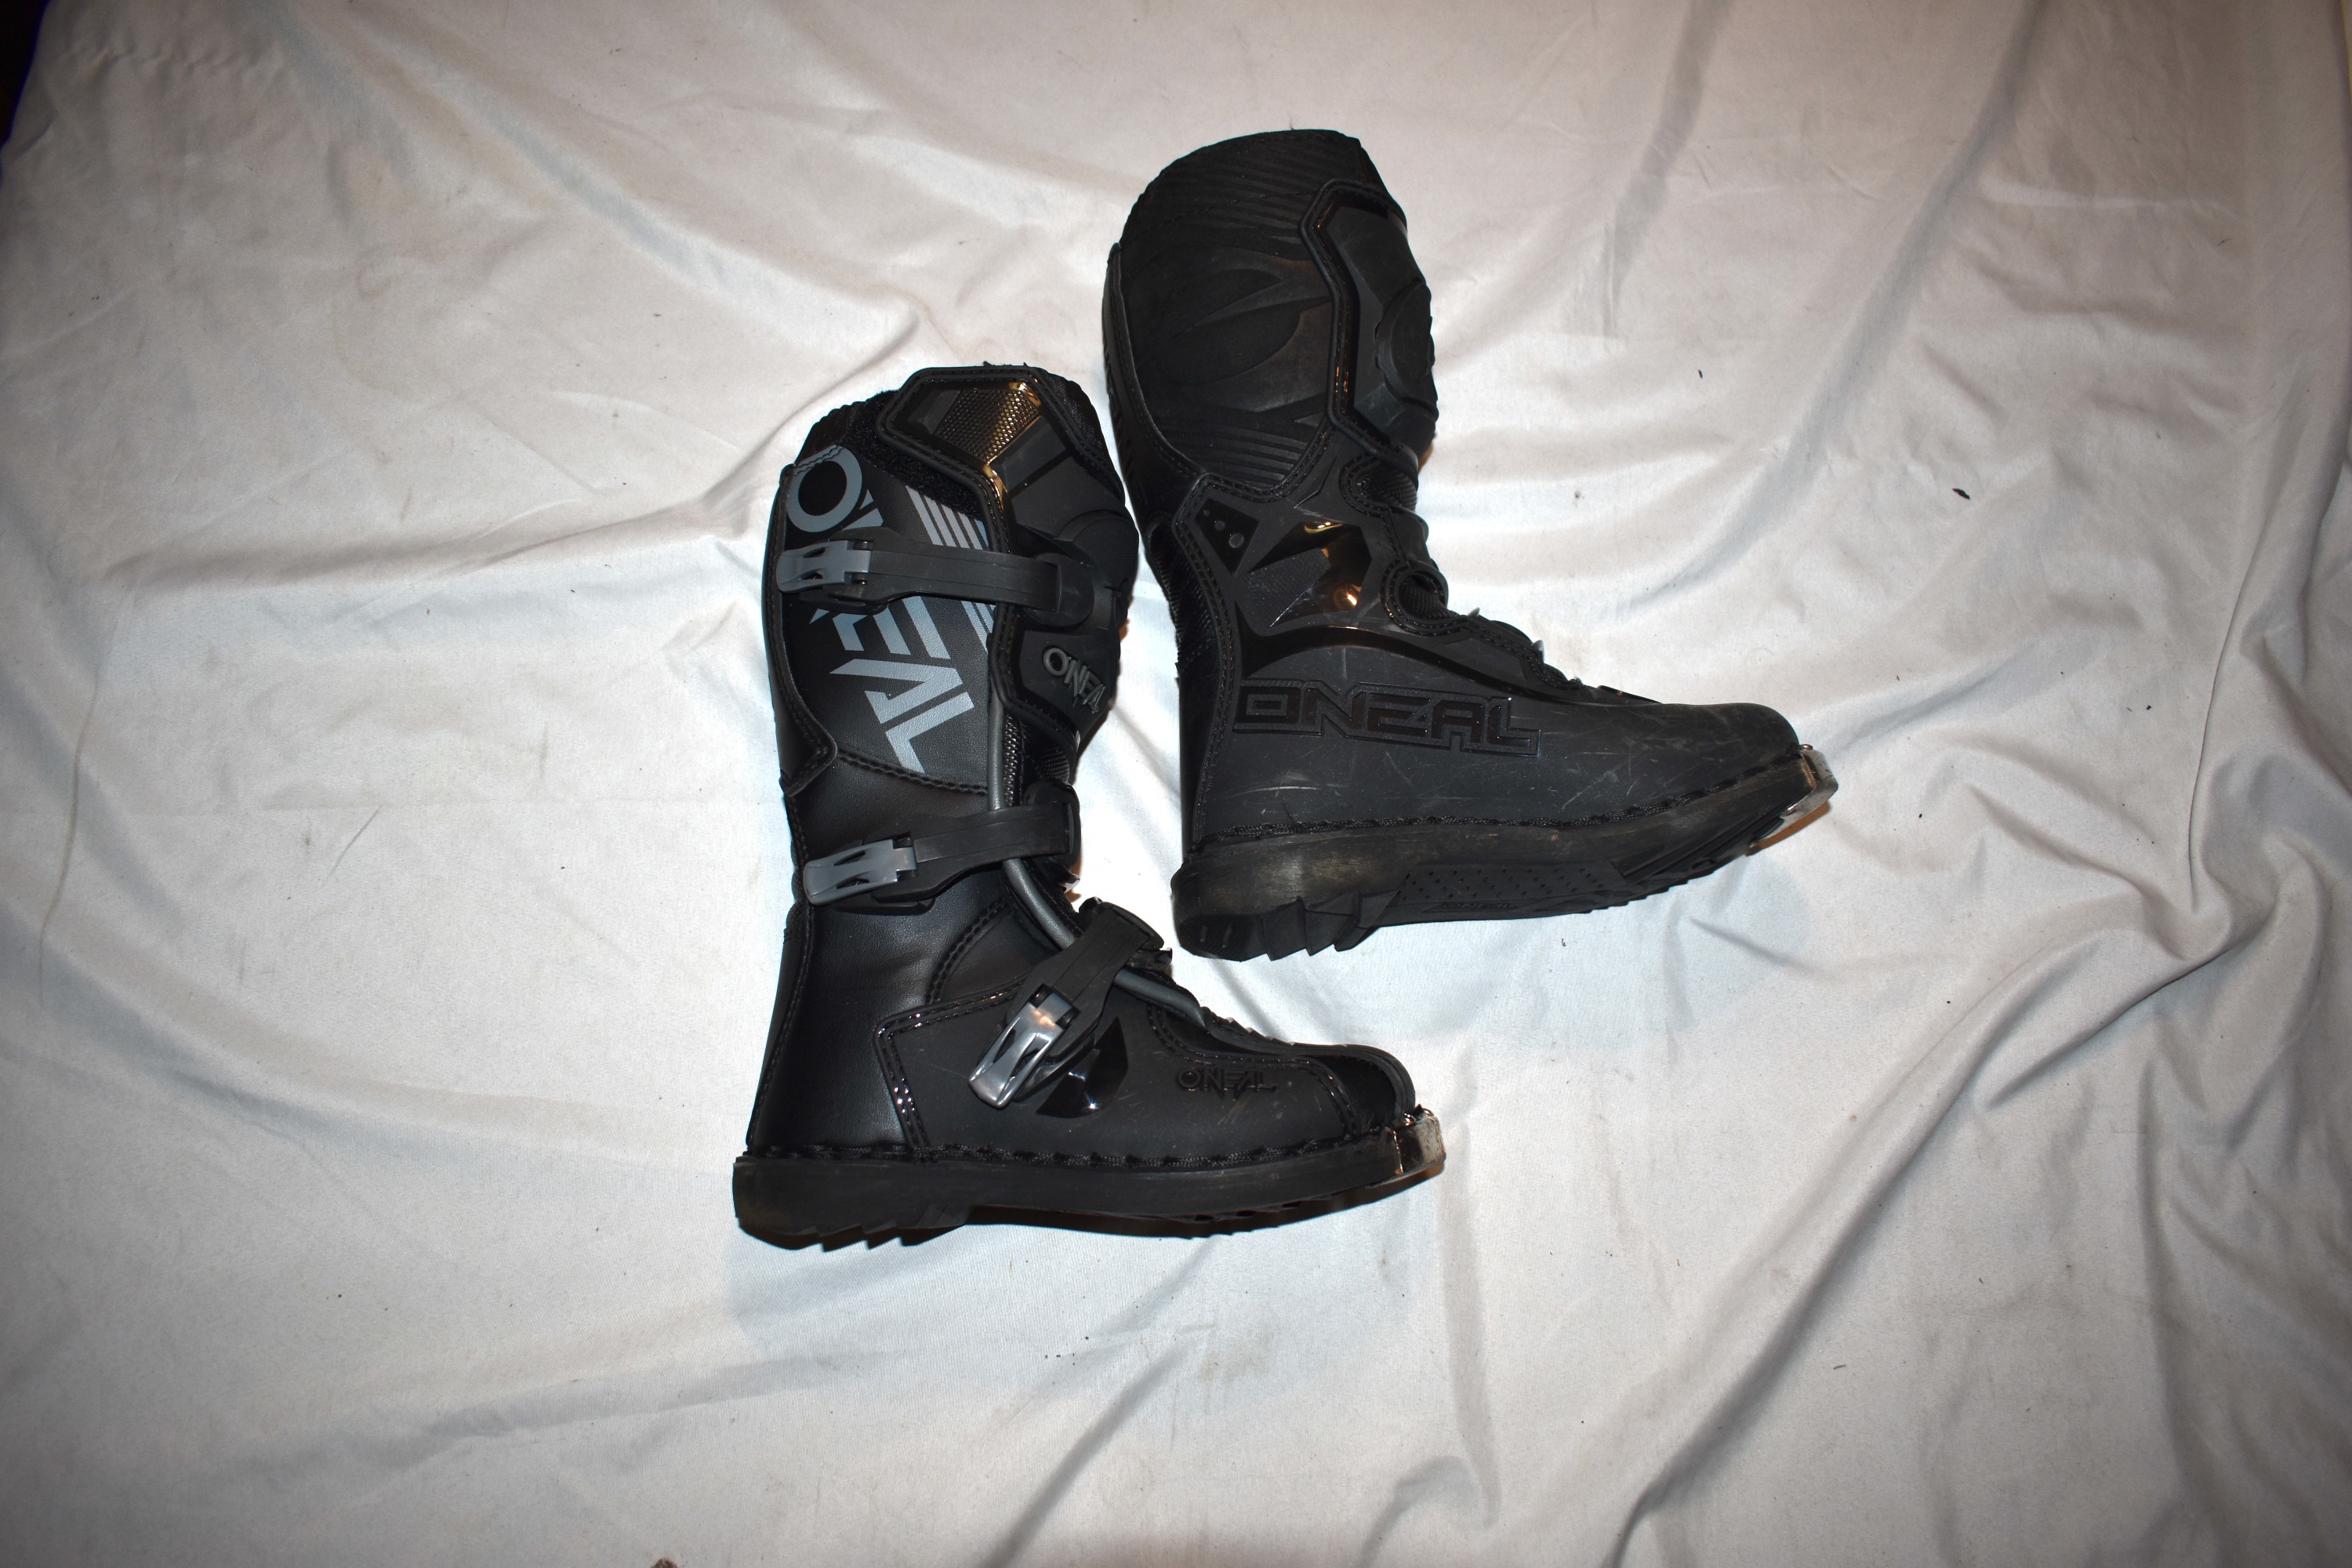 ONeal Element Motocross Boots, Black, Youth Size 1 - In the Box!